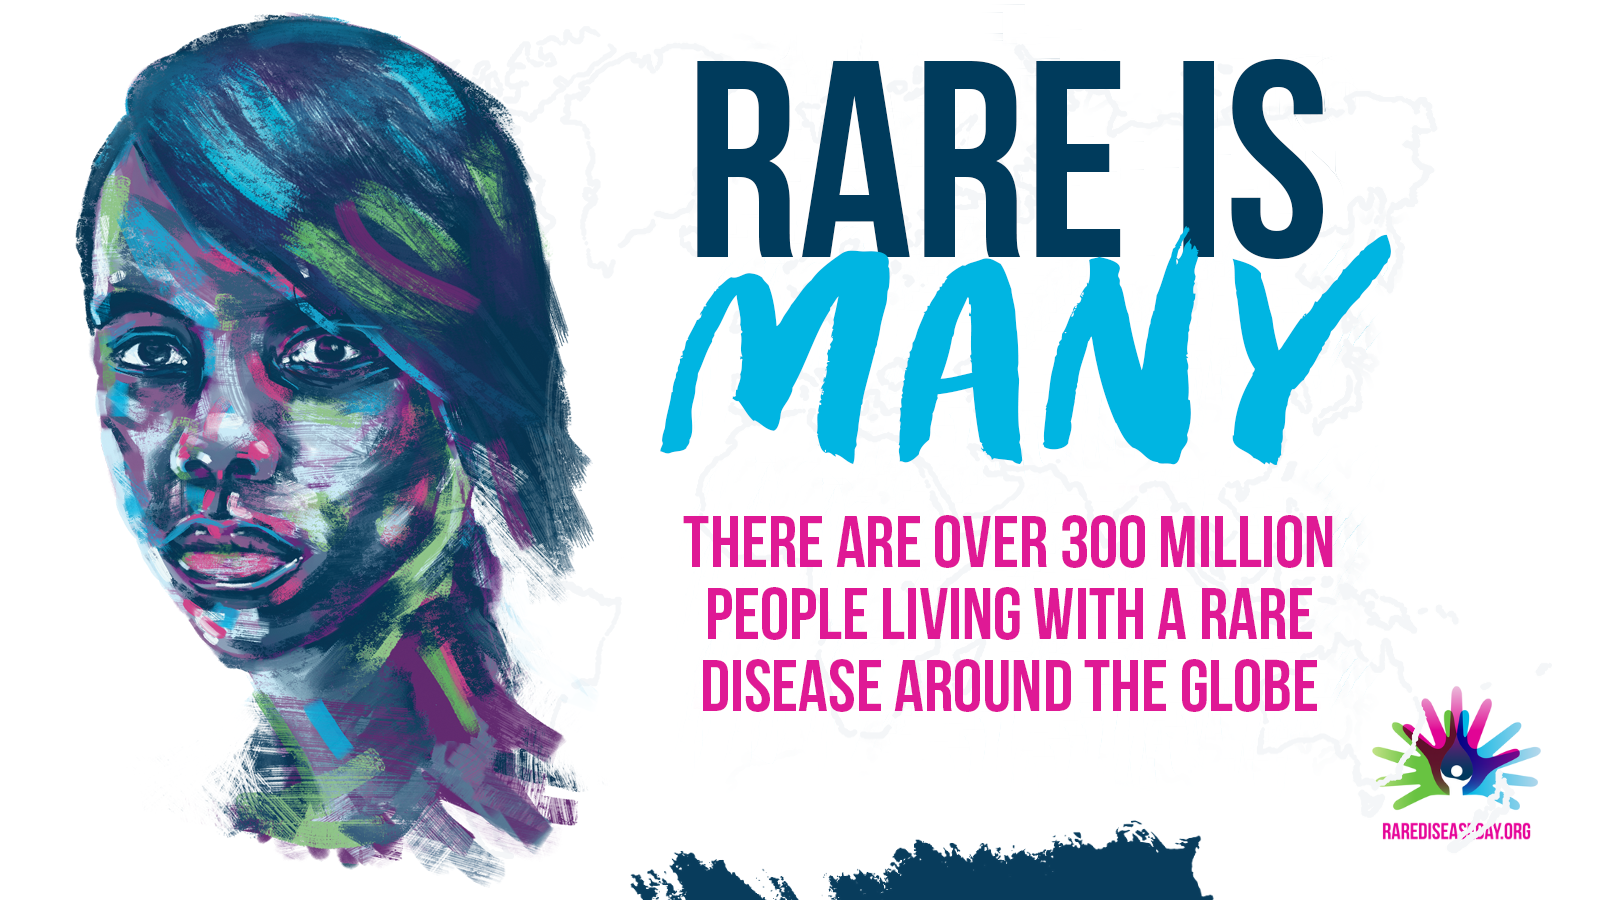 RARE IS MANY THERE ARE OVER 300 MILLION PEOPLE LIVING WITH A RARE DISEASE AROUND THE GLOBE